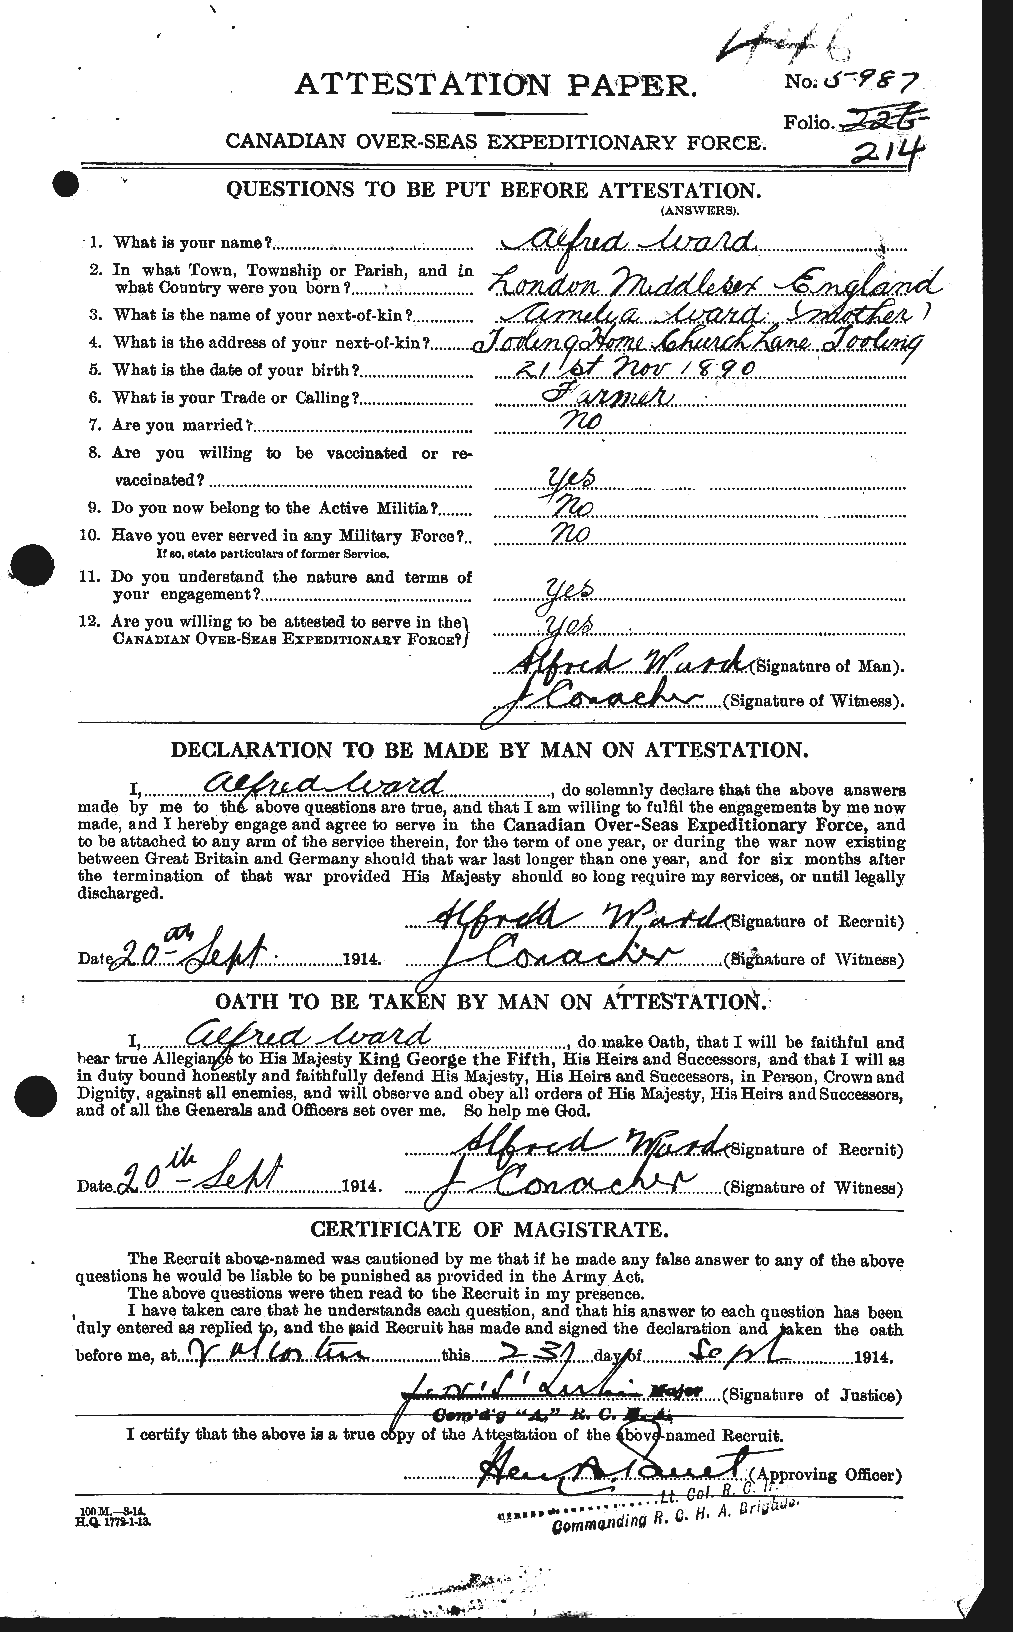 Personnel Records of the First World War - CEF 655119a